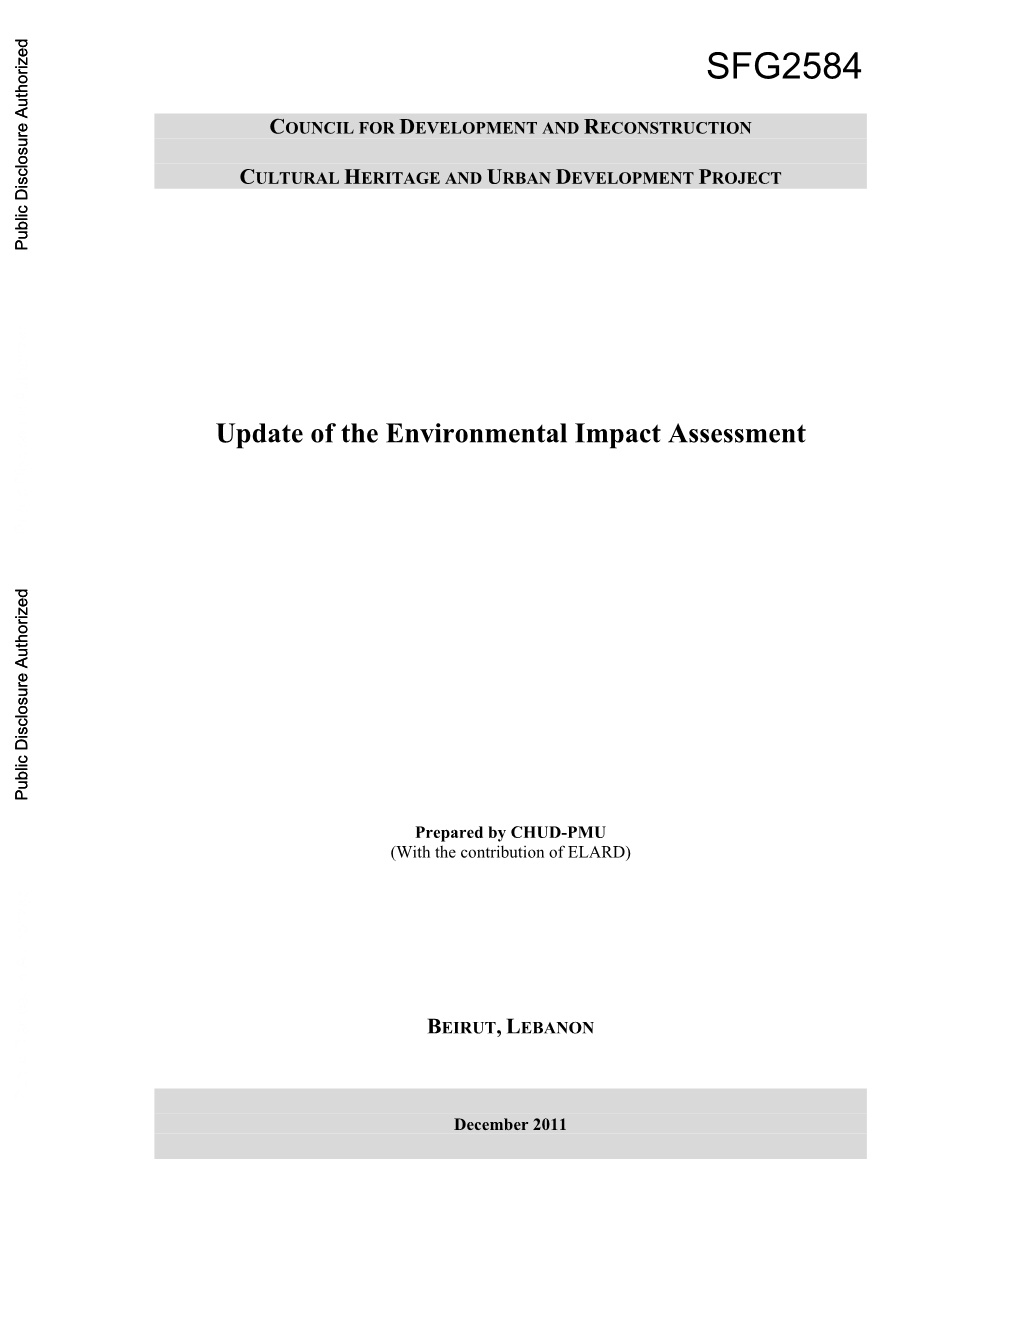 Update of the Environmental Impact Assessment Public Disclosure Authorized Public Disclosure Authorized